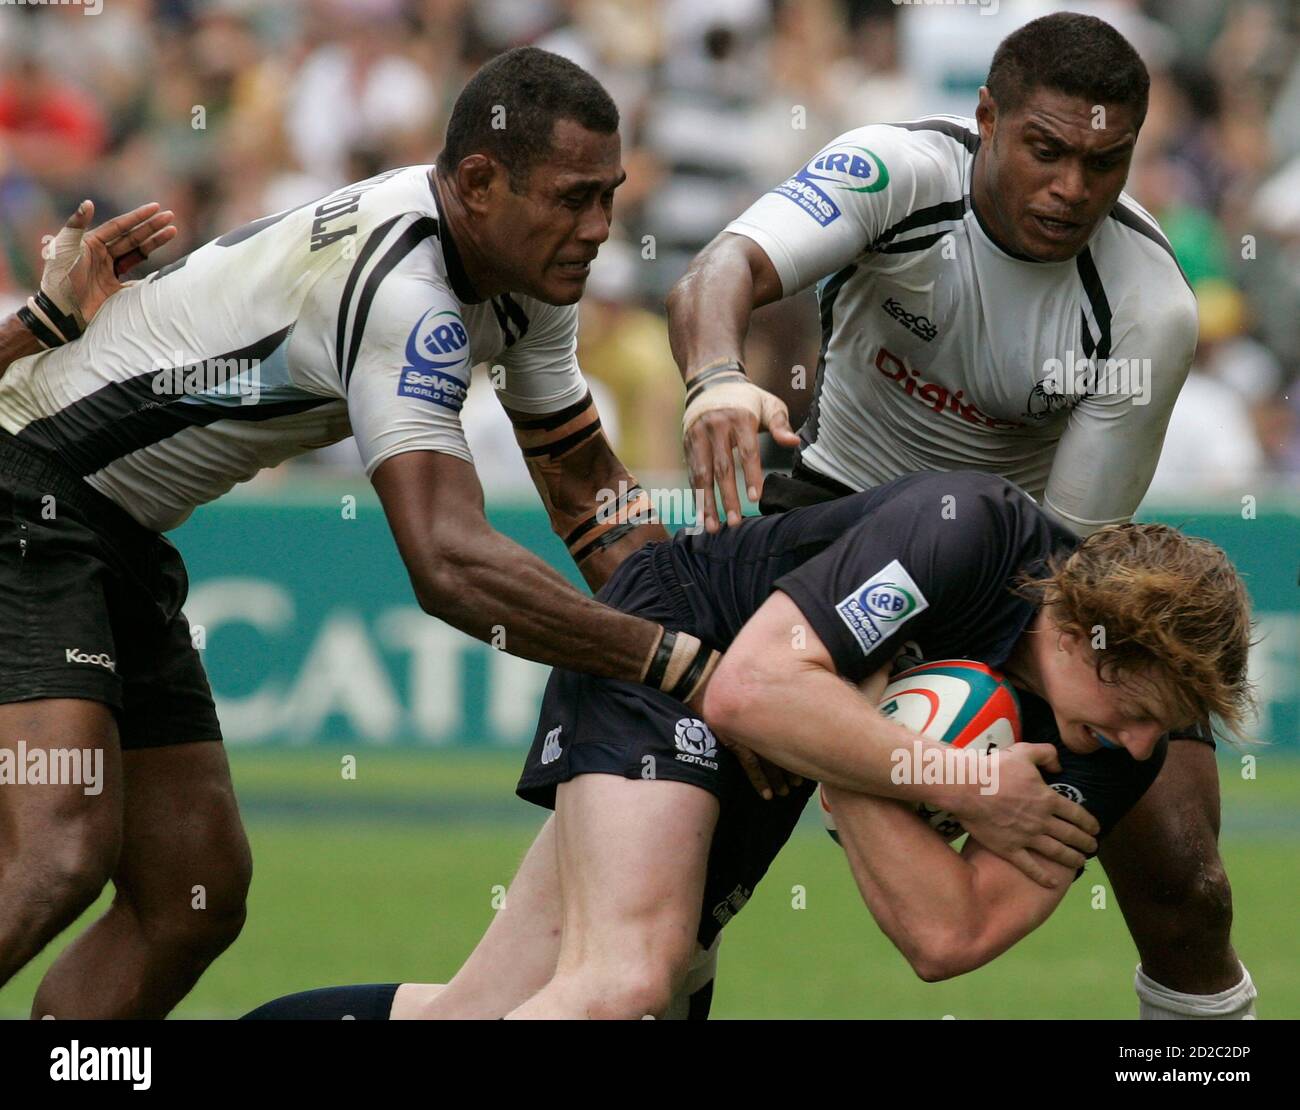 Scotland's Simon Cross (bottom) is tackled by Fiji's Mosese Volavola (L) and Etonia Naba during their Cup quarter-final match at the Hong Kong Sevens rugby tournament in Hong Kong April 1, 2007.      REUTERS/Bobby Yip  (CHINA) Stock Photo